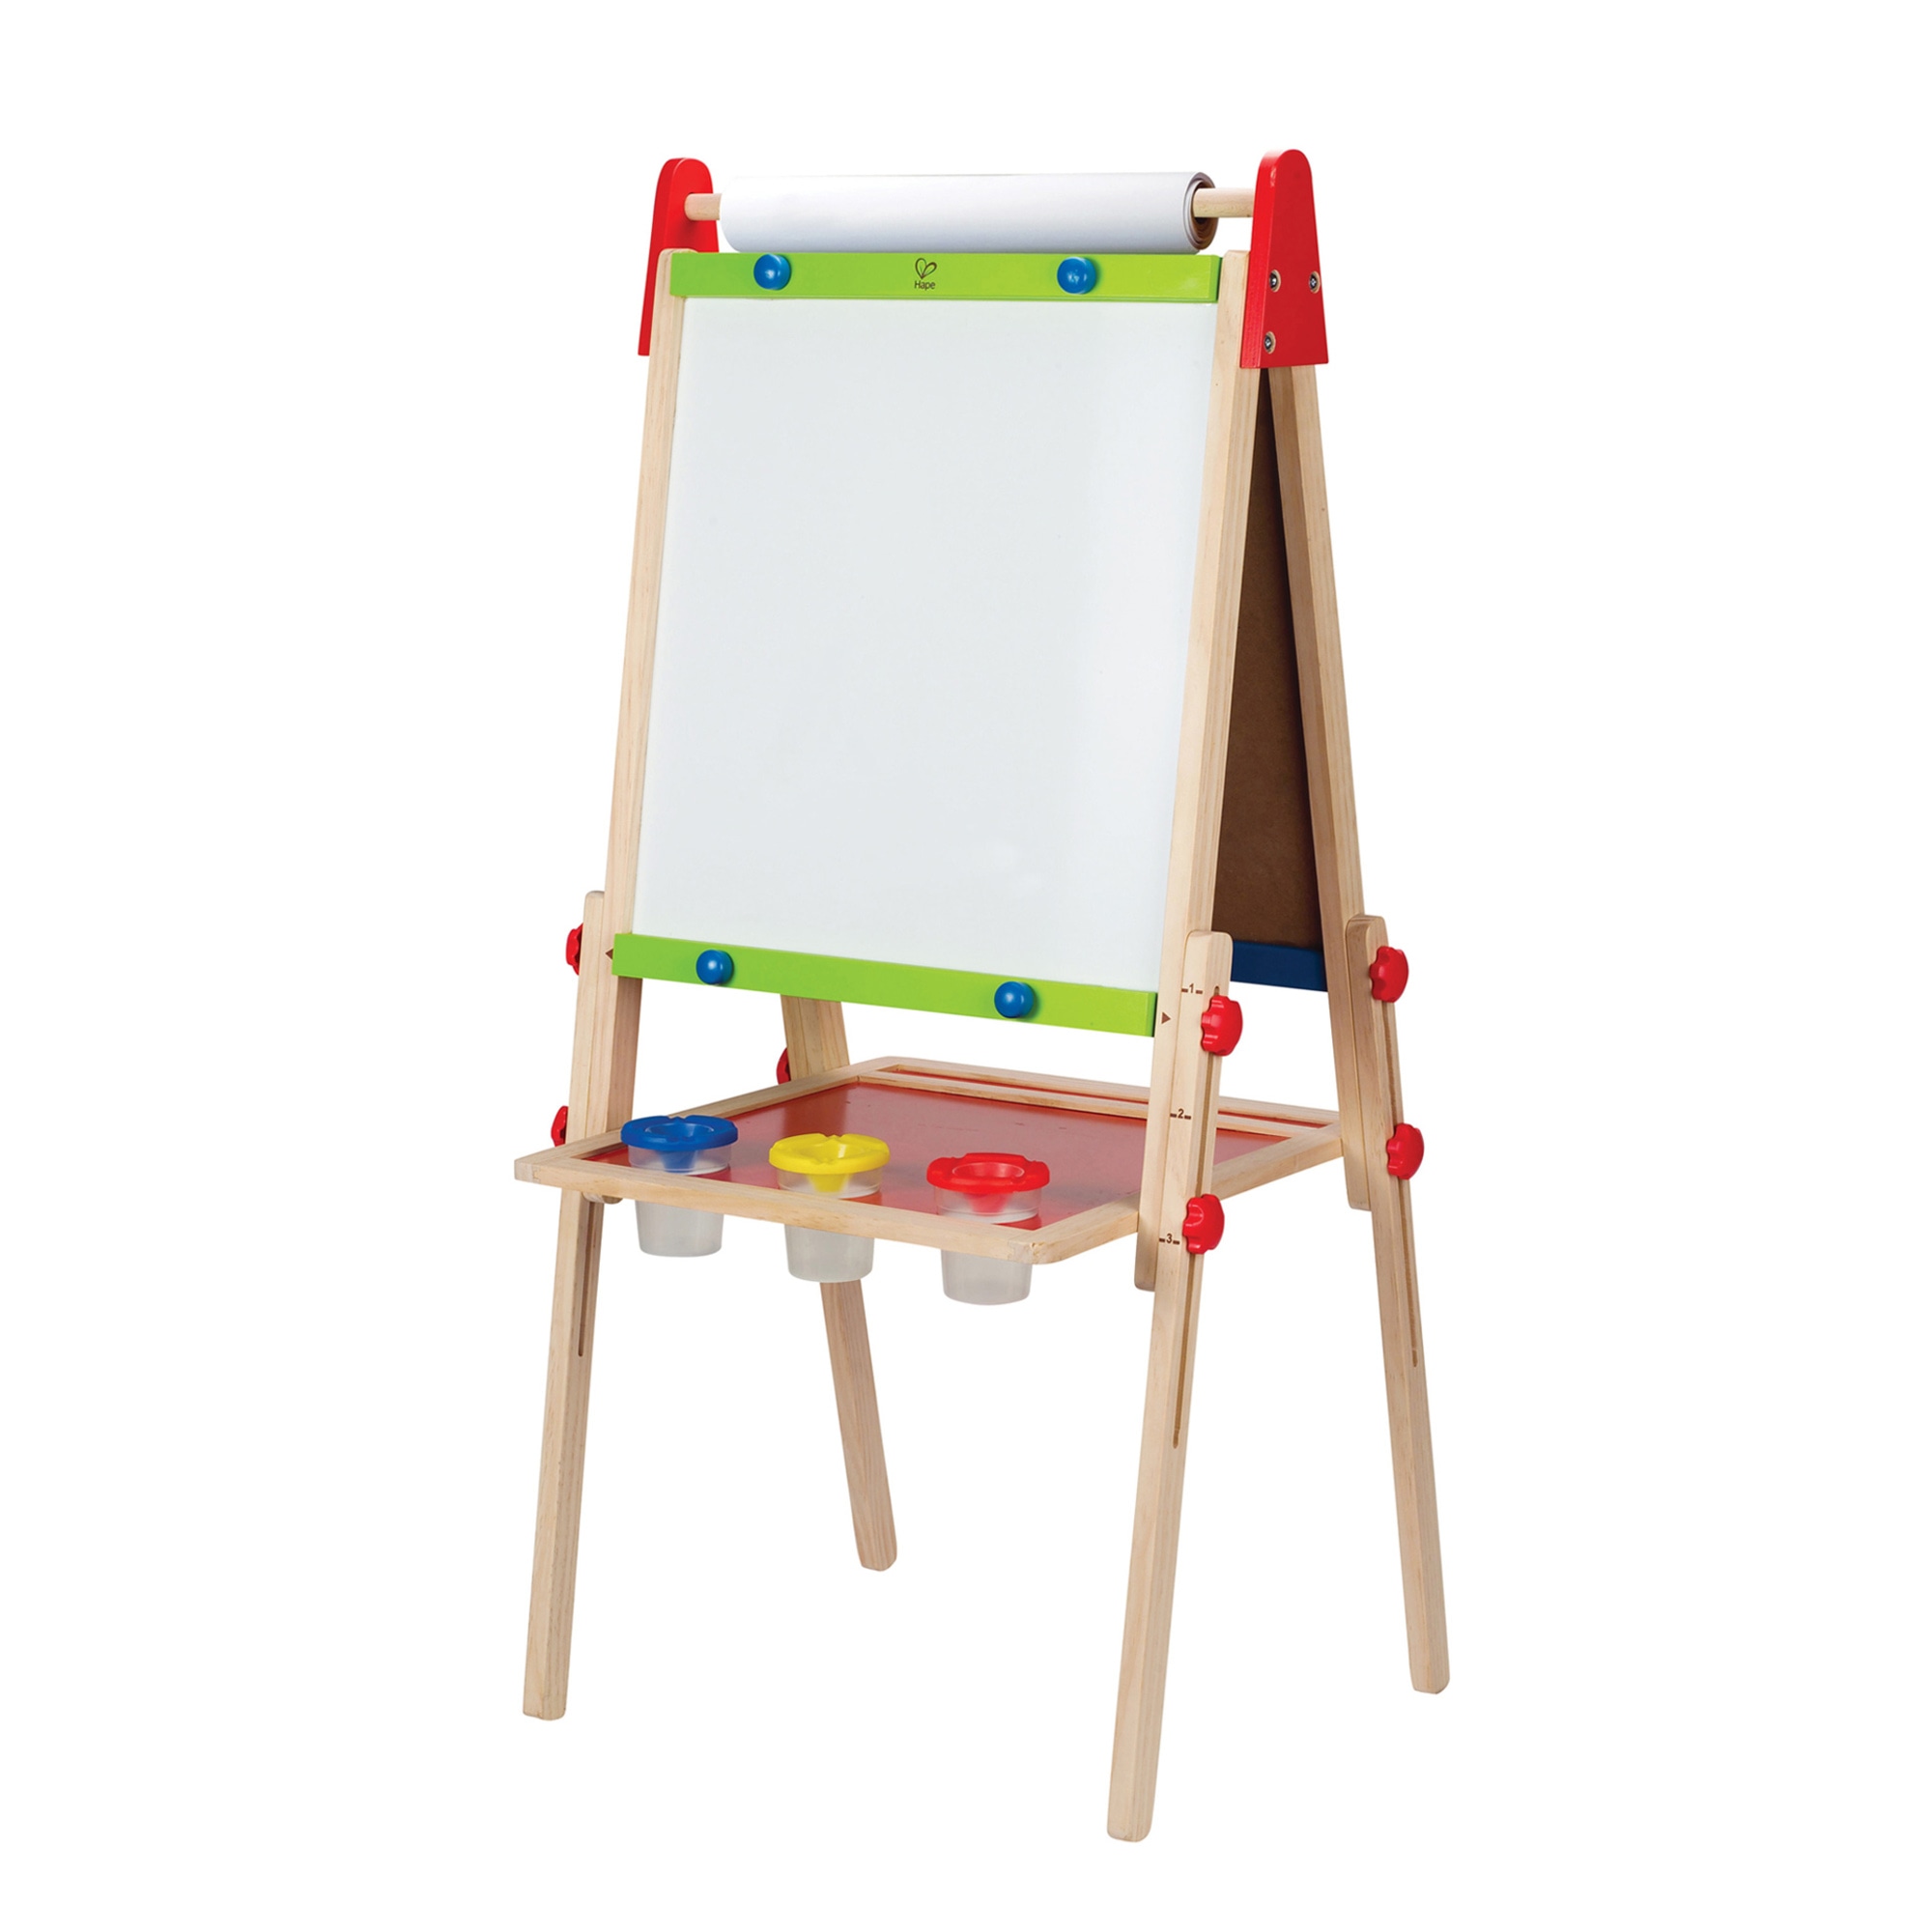 Hape All-in-One Double-Sided Art Easel w/ Paper Roll & Accessories, Blackboard & Magnetic Whiteboard - image 1 of 6